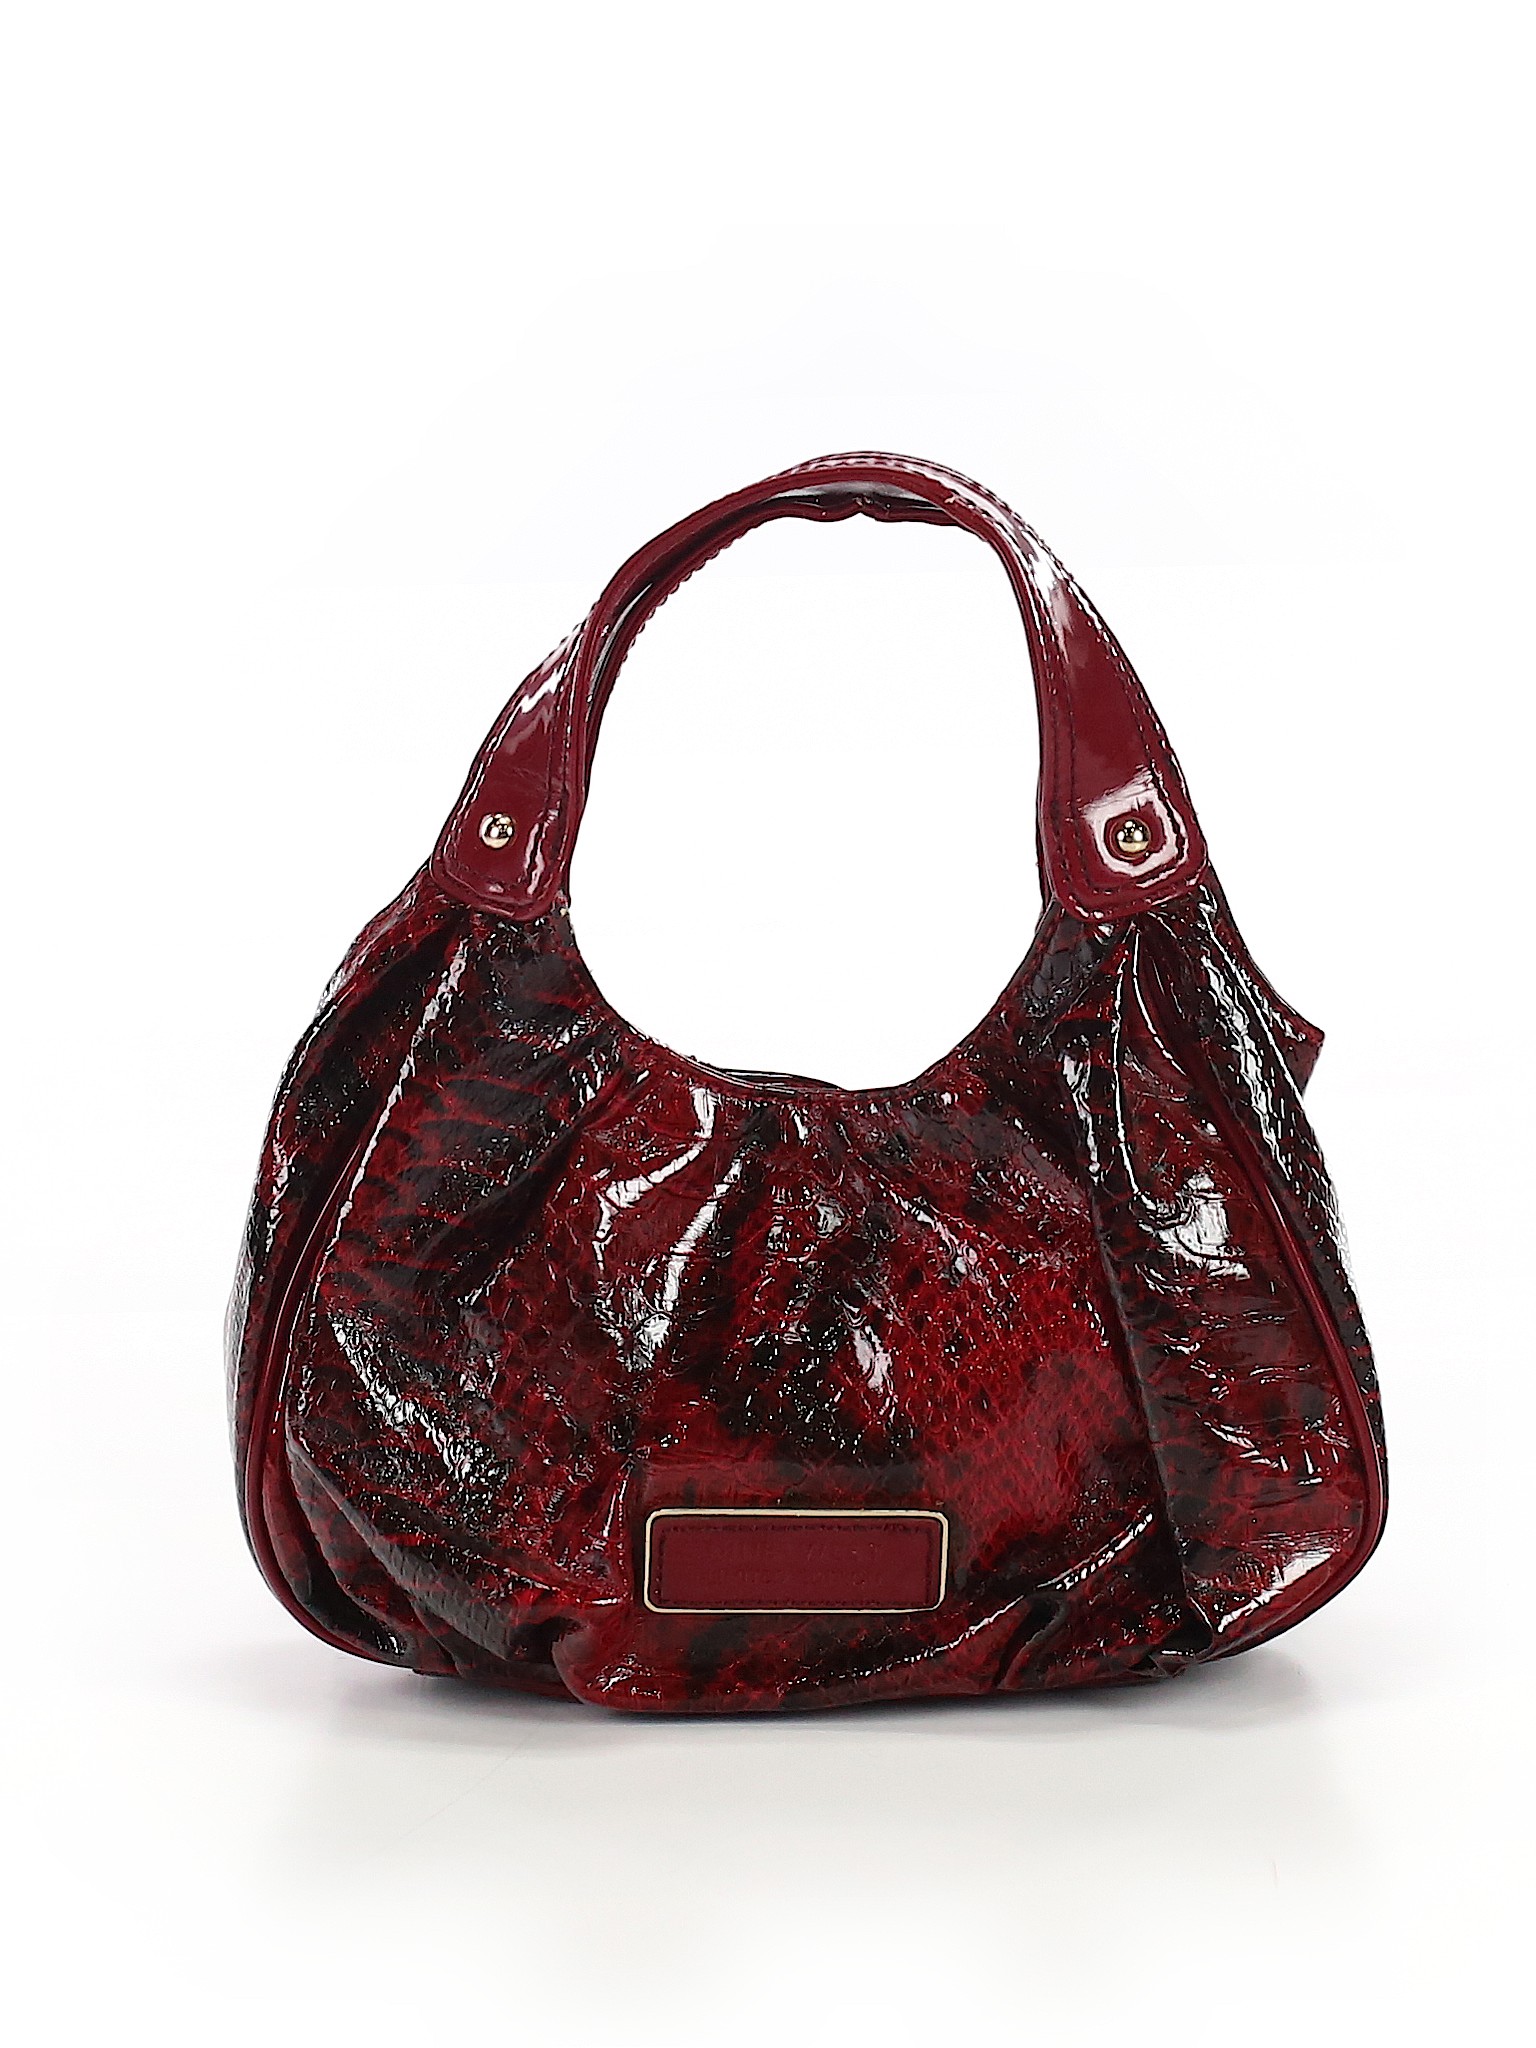 Nine West Print Red Leather Satchel One Size - 75% off | thredUP